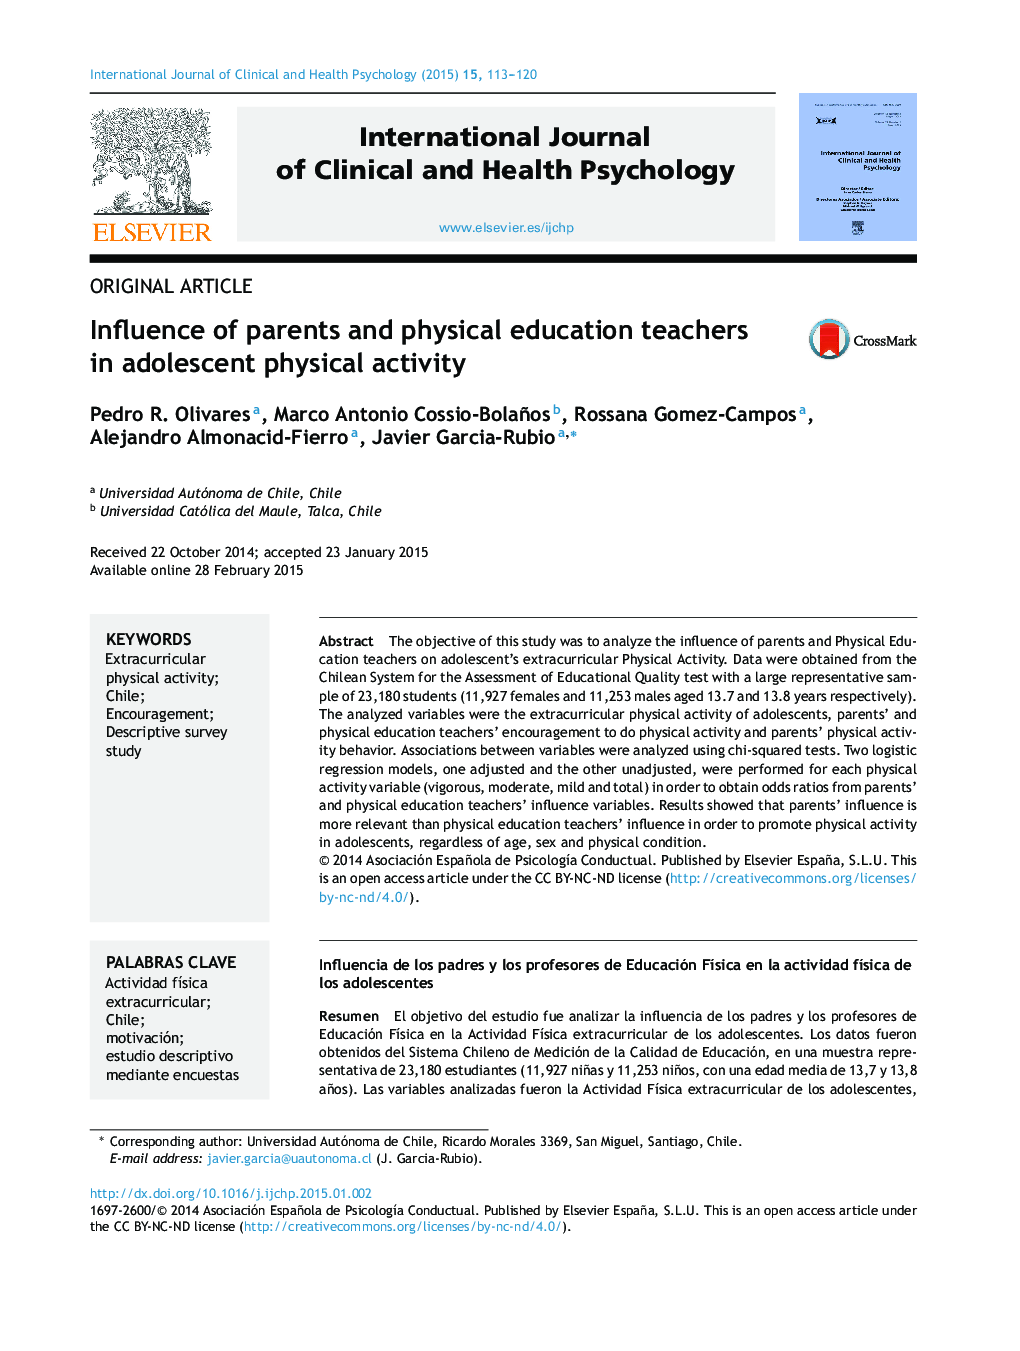 Influence of parents and physical education teachers in adolescent physical activity 